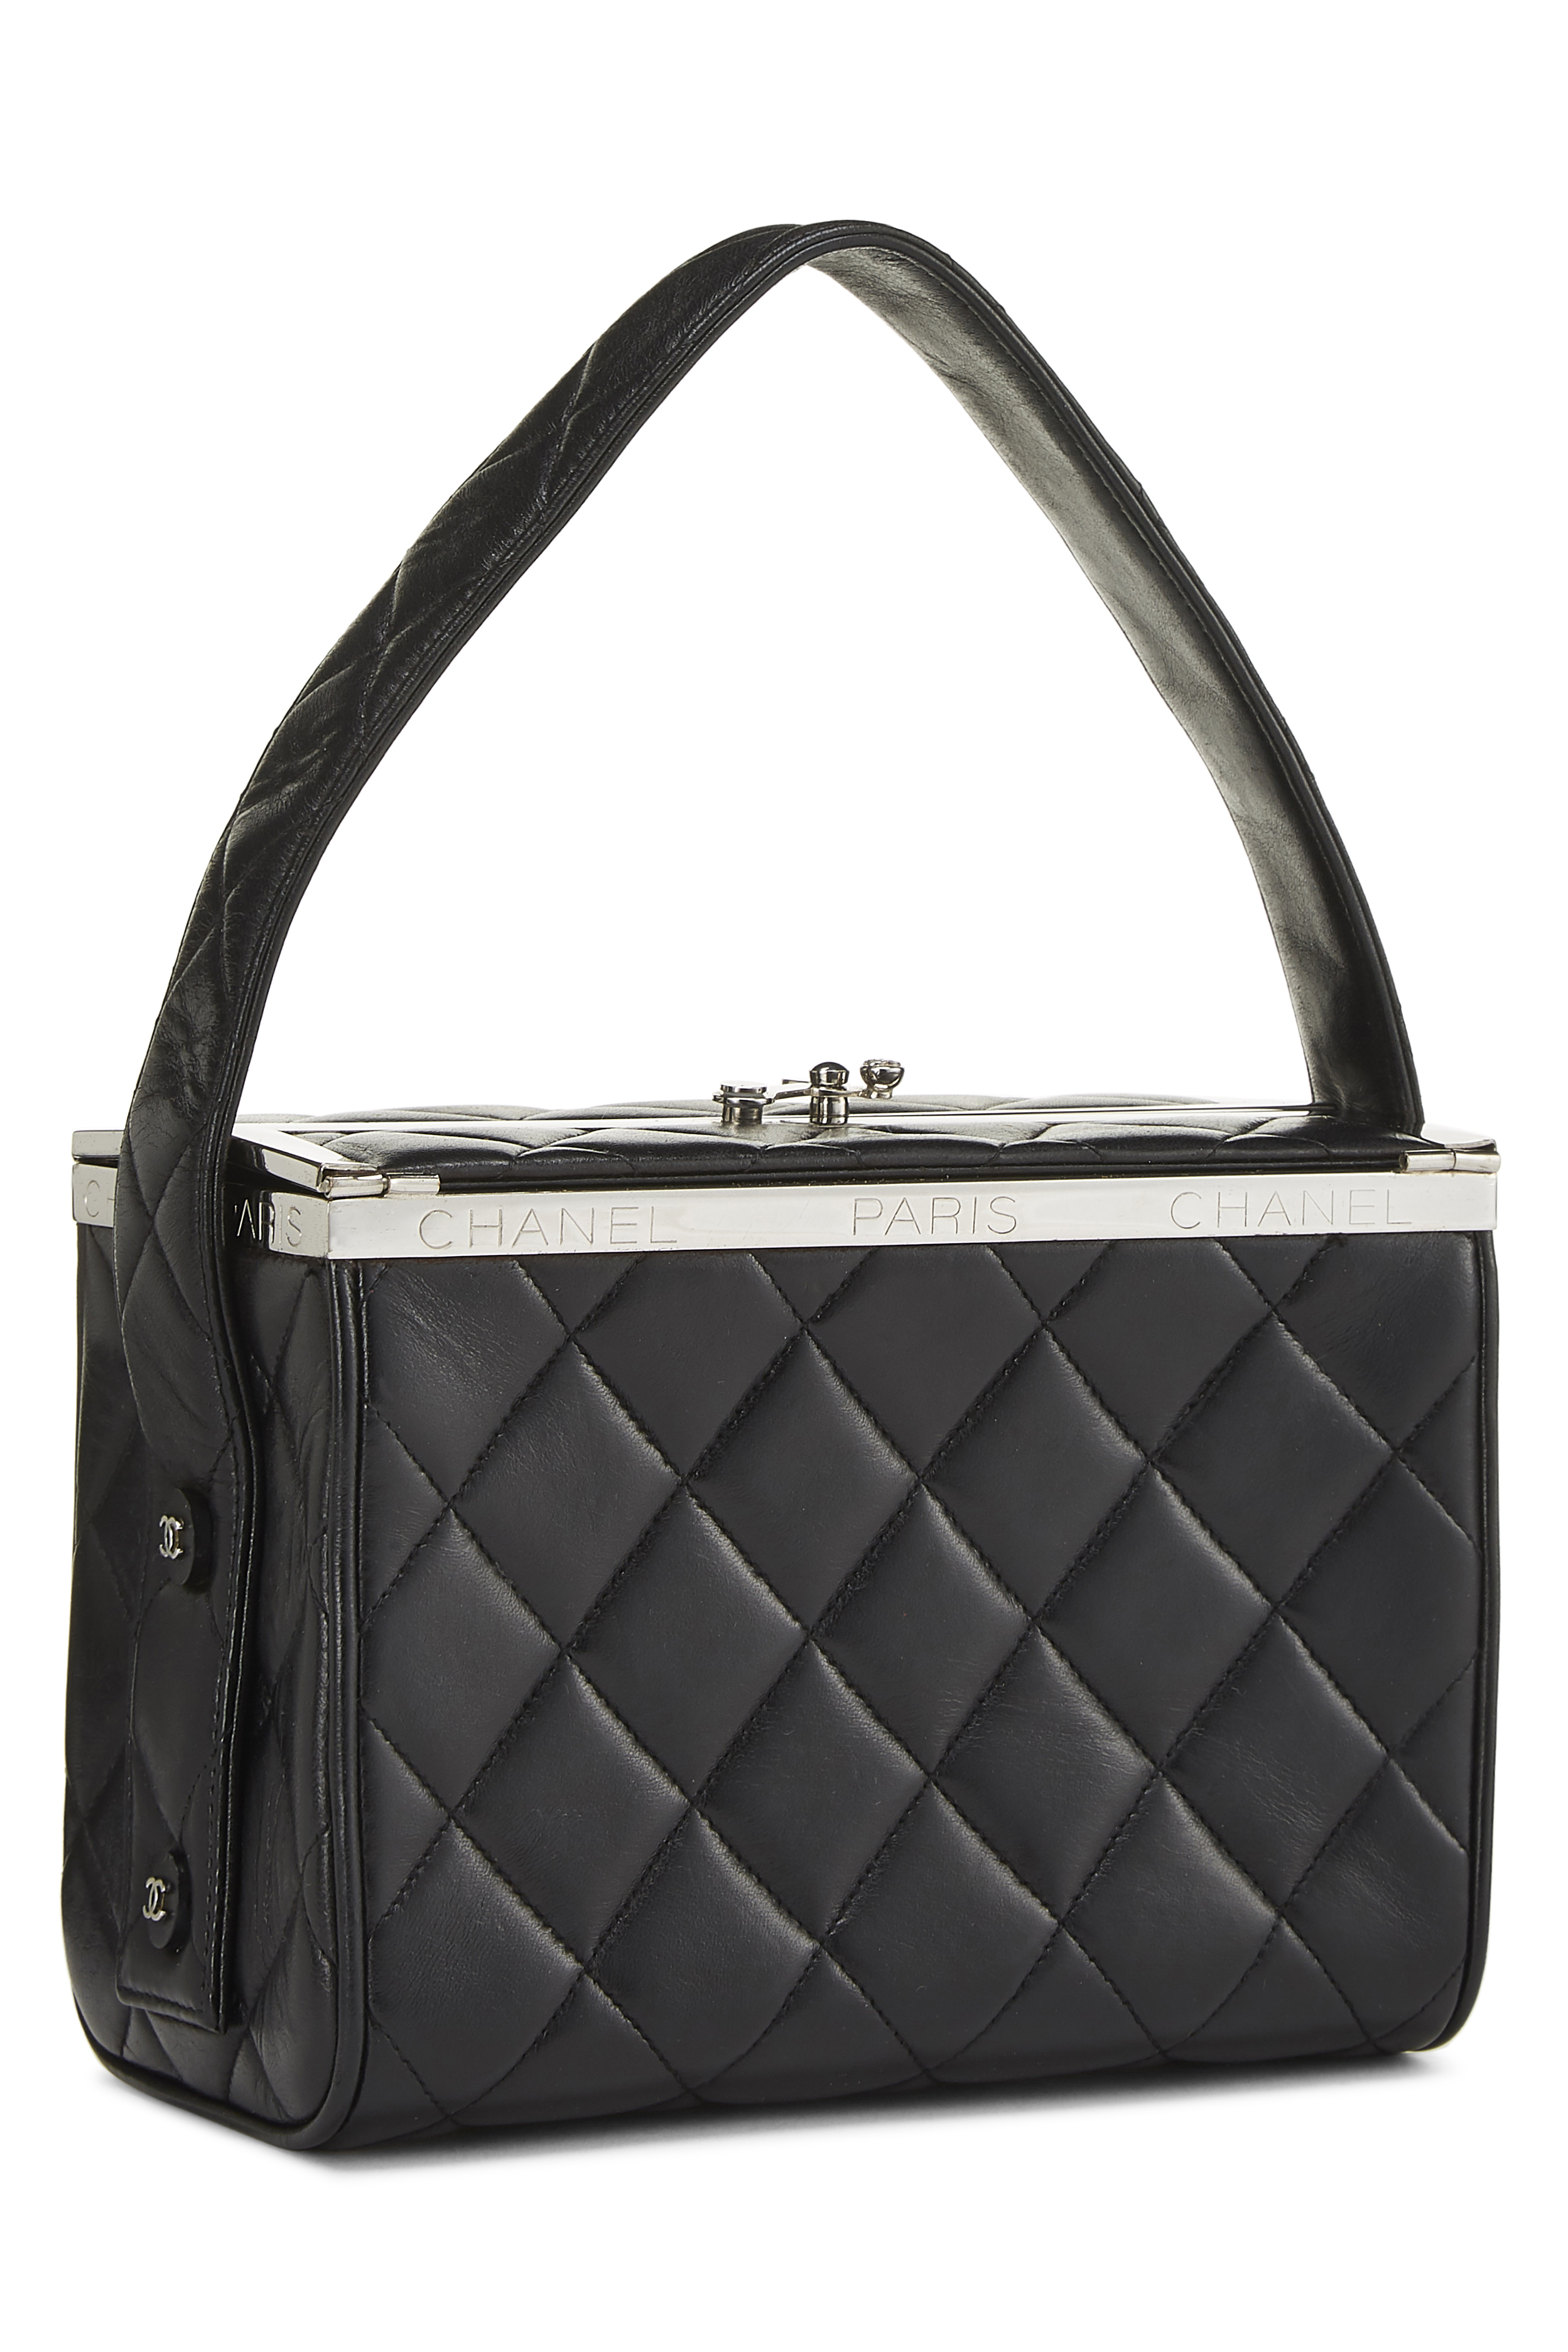 Chanel - Black Quilted Lambskin Box Bag